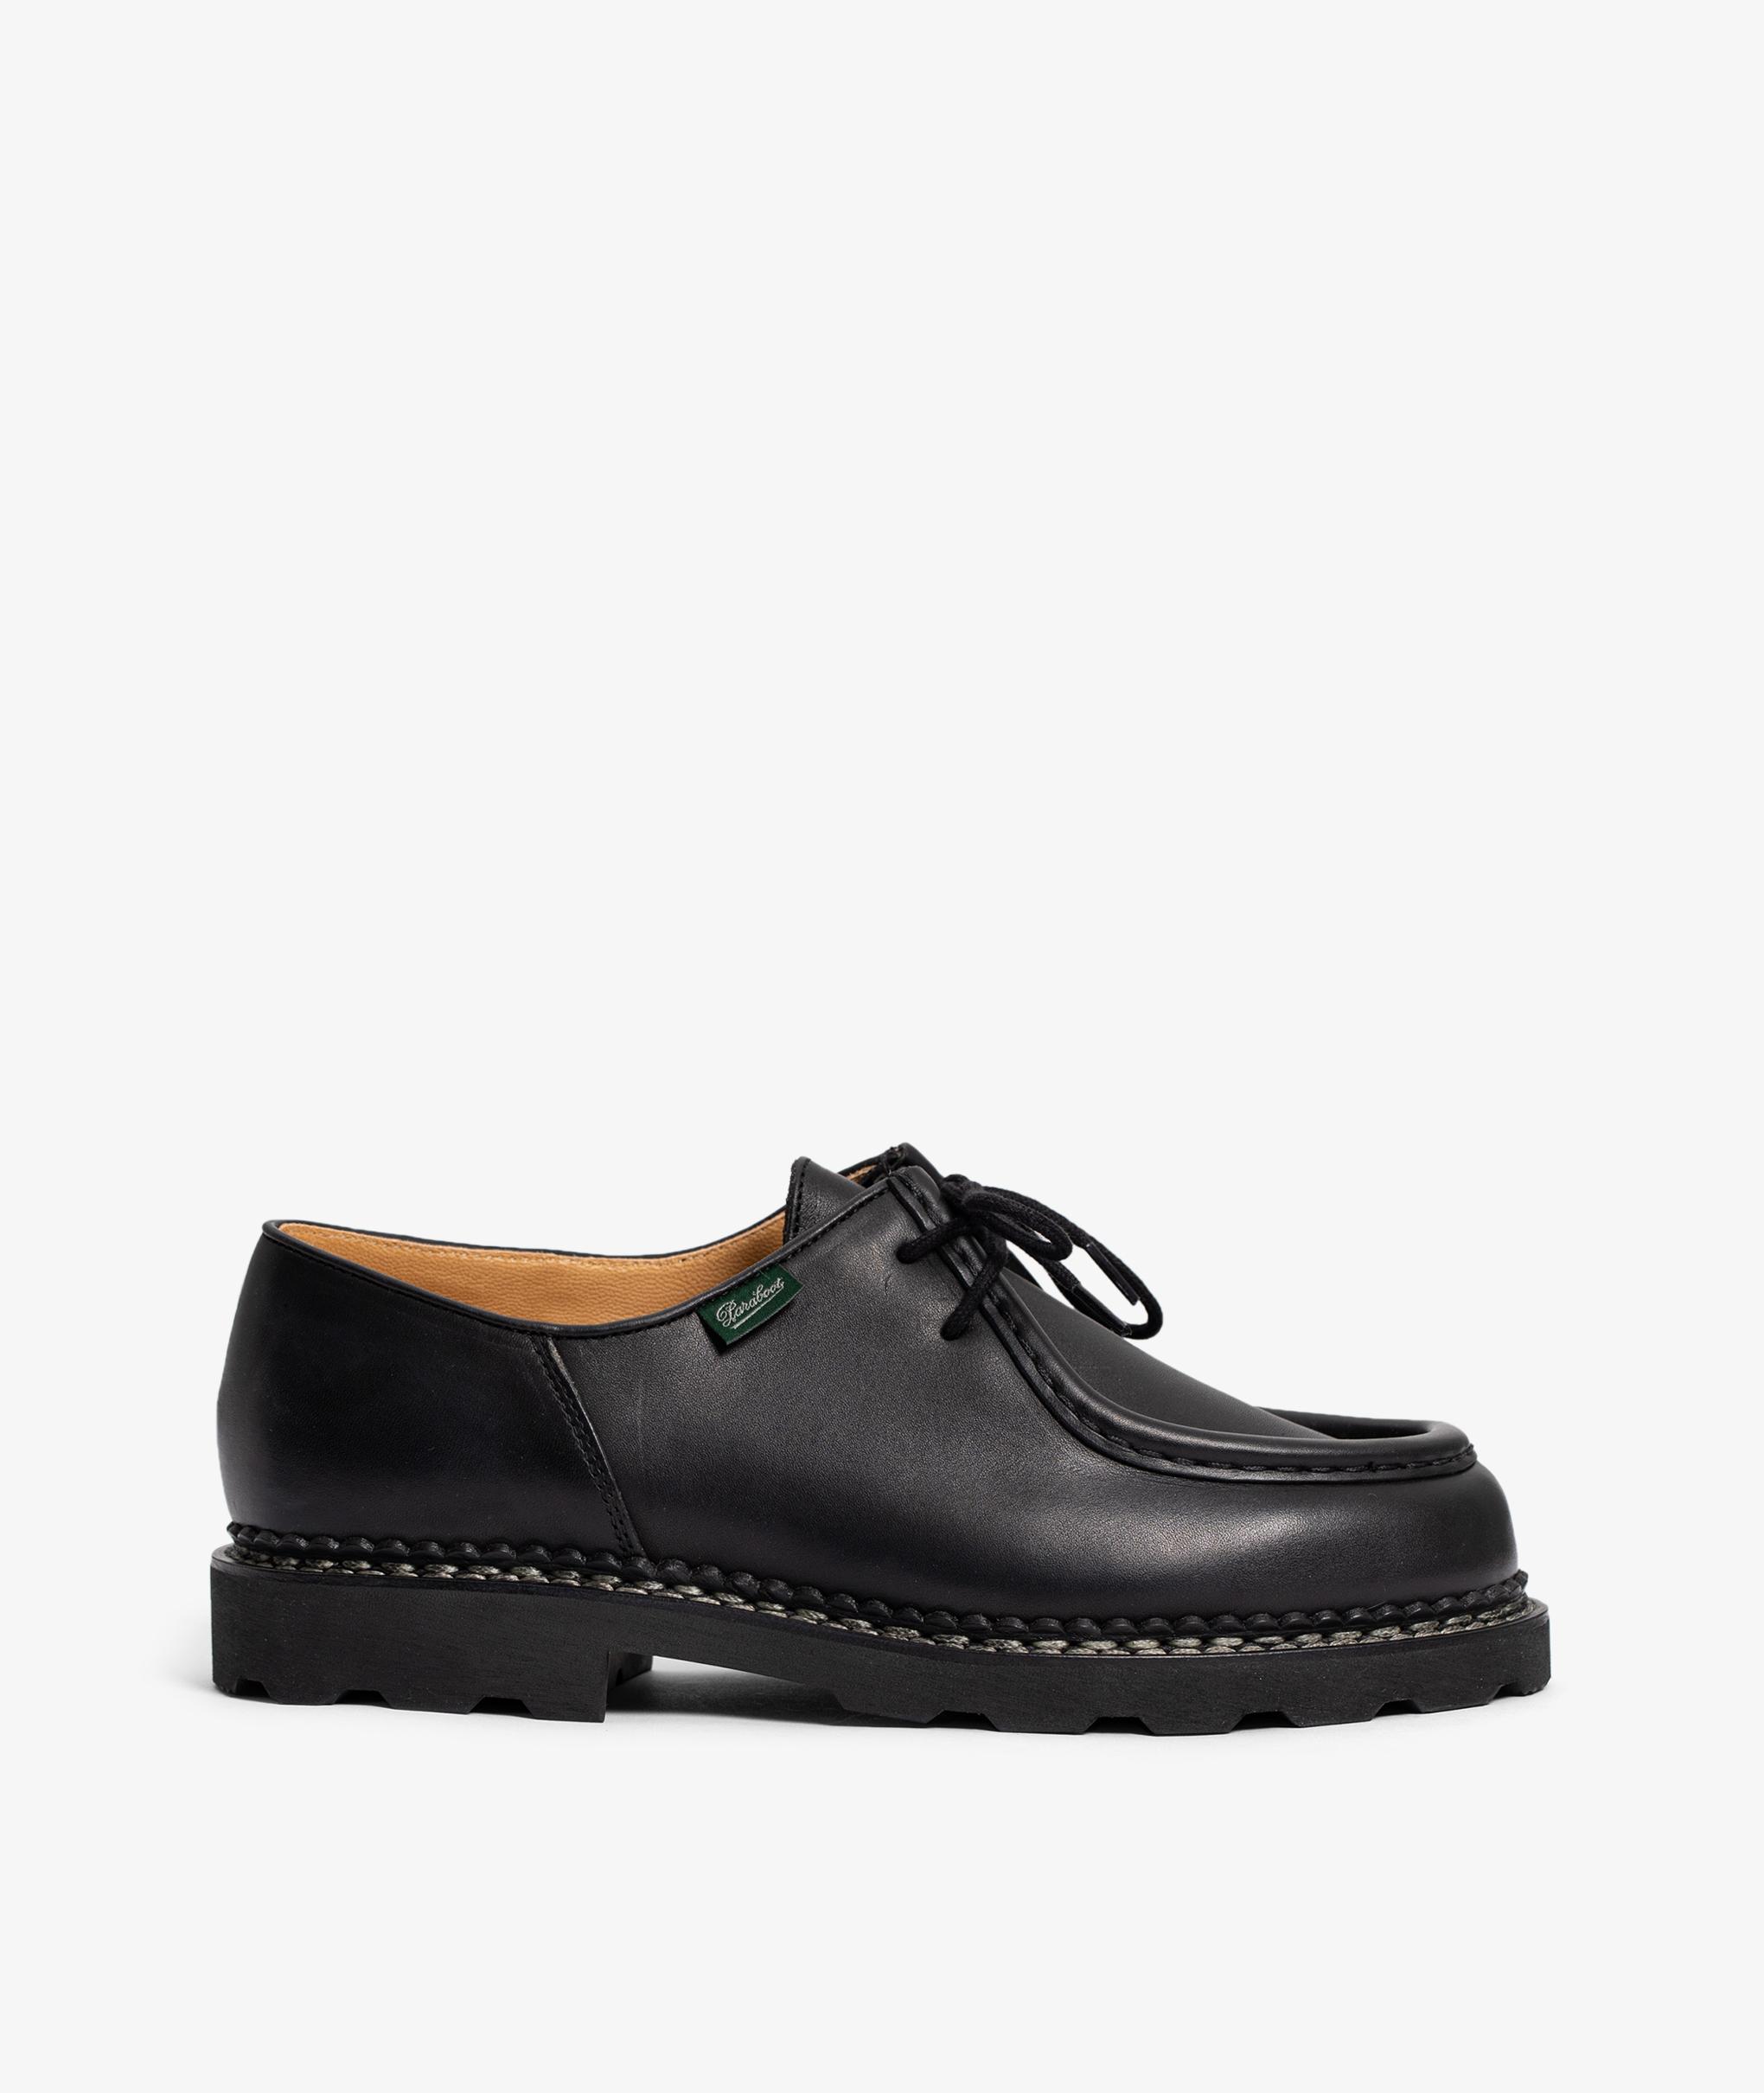 Norse Store | Shipping Worldwide - Shoes - Paraboot - Michael